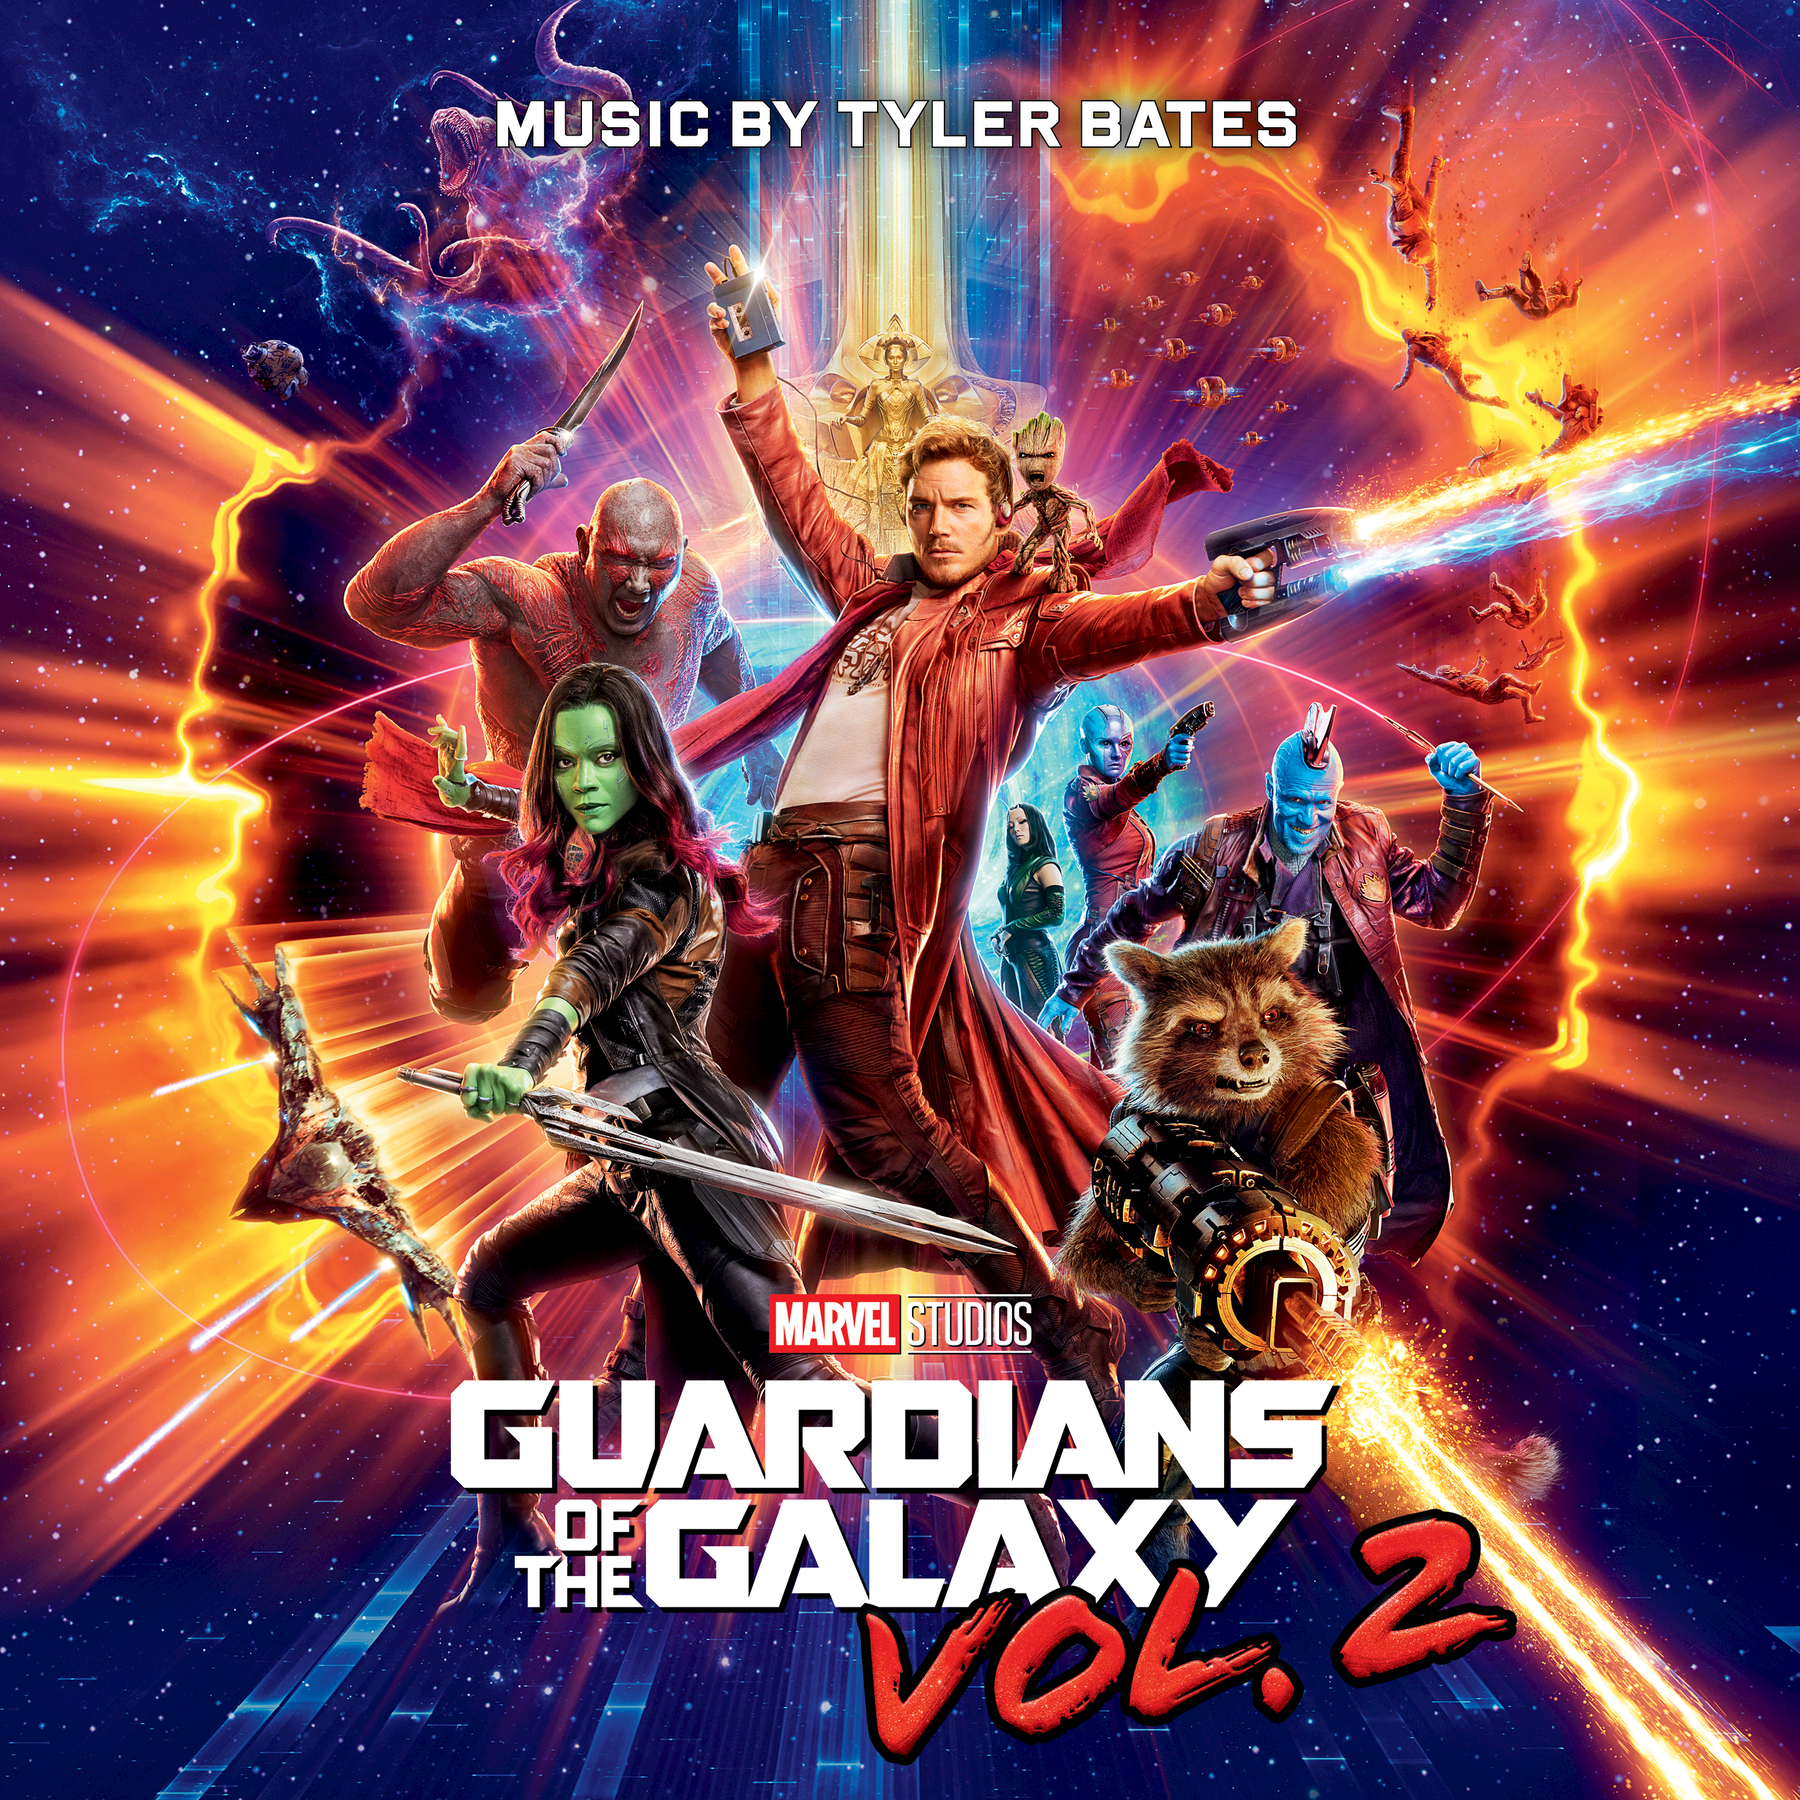 guardians of the galaxy vol 2 soundtrack wiki